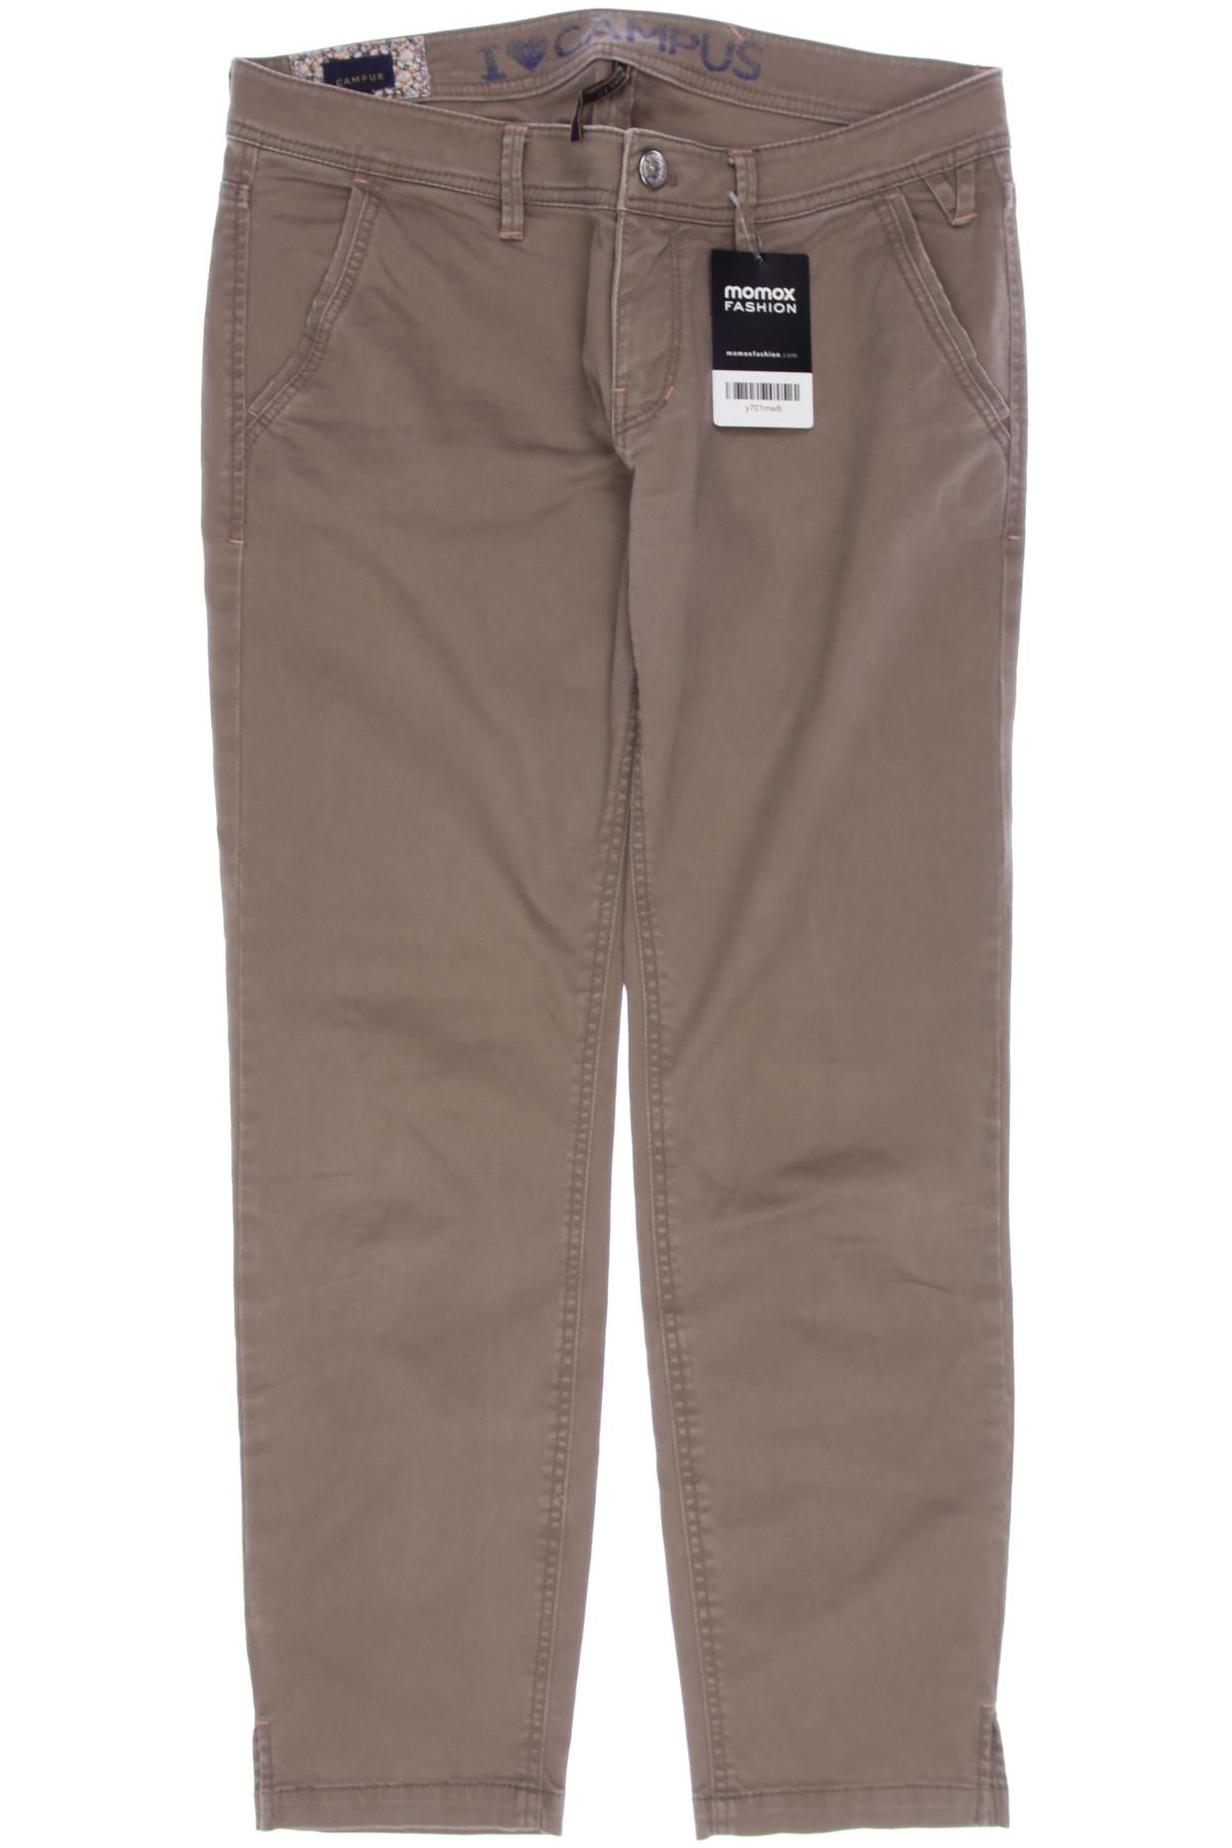 CAMPUS by Marc O Polo Damen Jeans, beige von CAMPUS by Marc O Polo